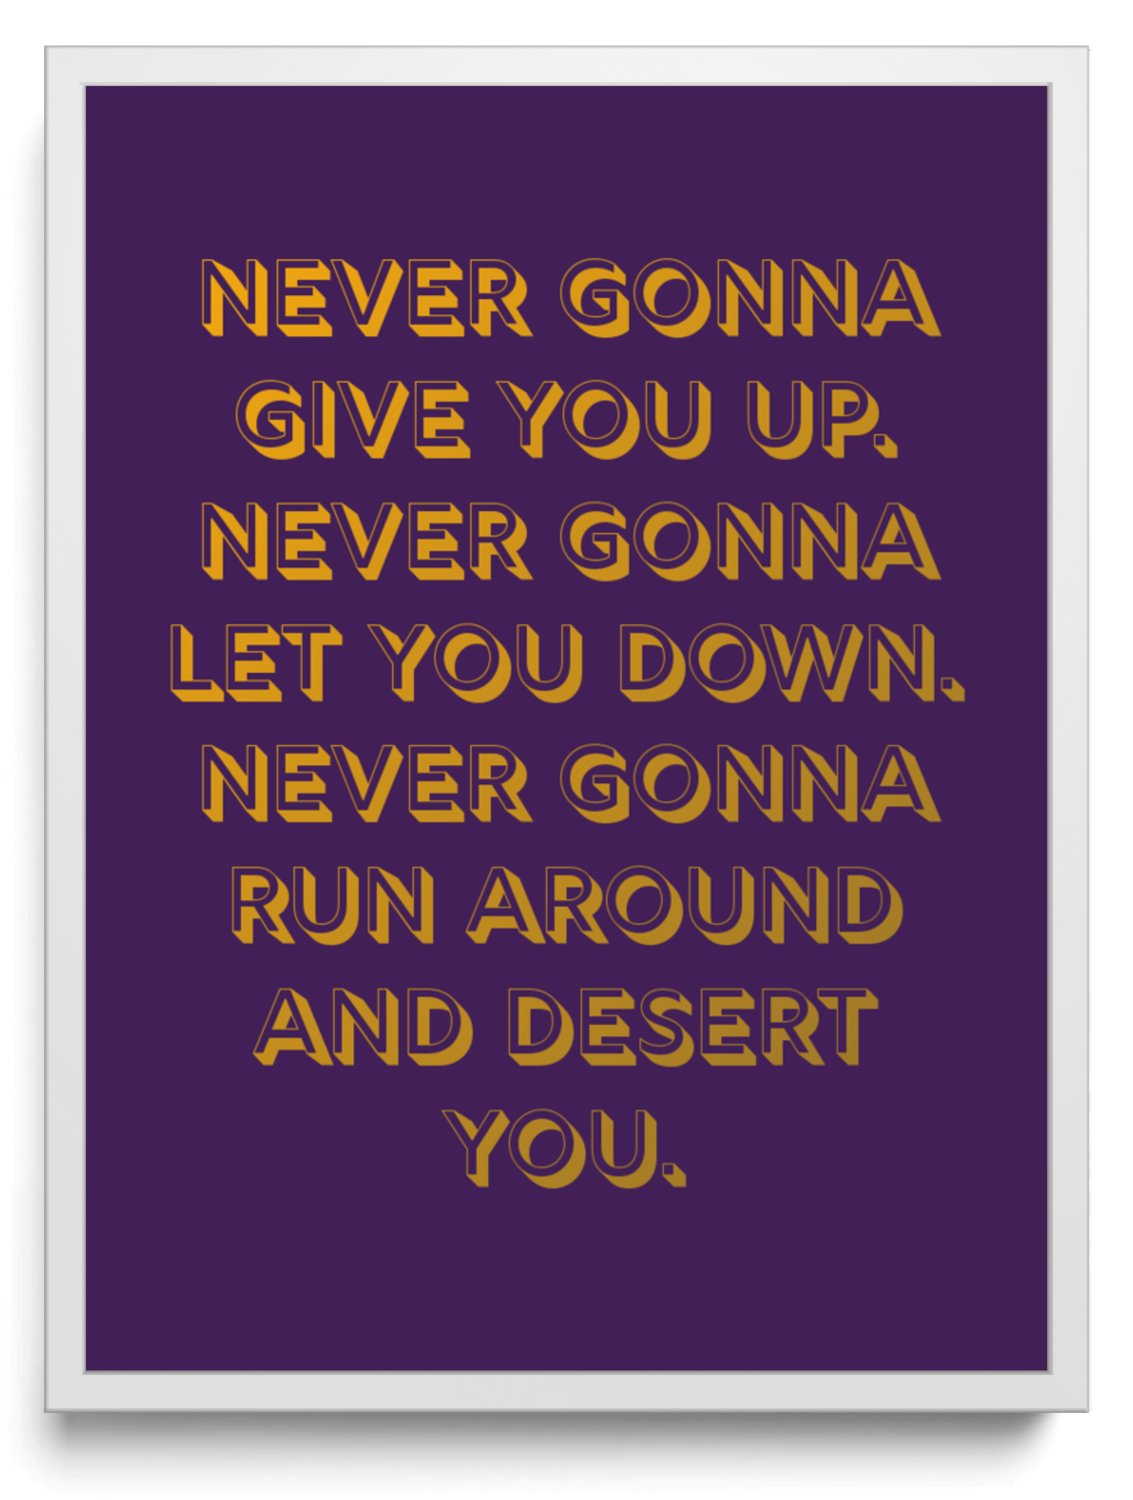 Never gonna give you up. Never gonna let you down. Never gonna run around and desert you. framed typographic print